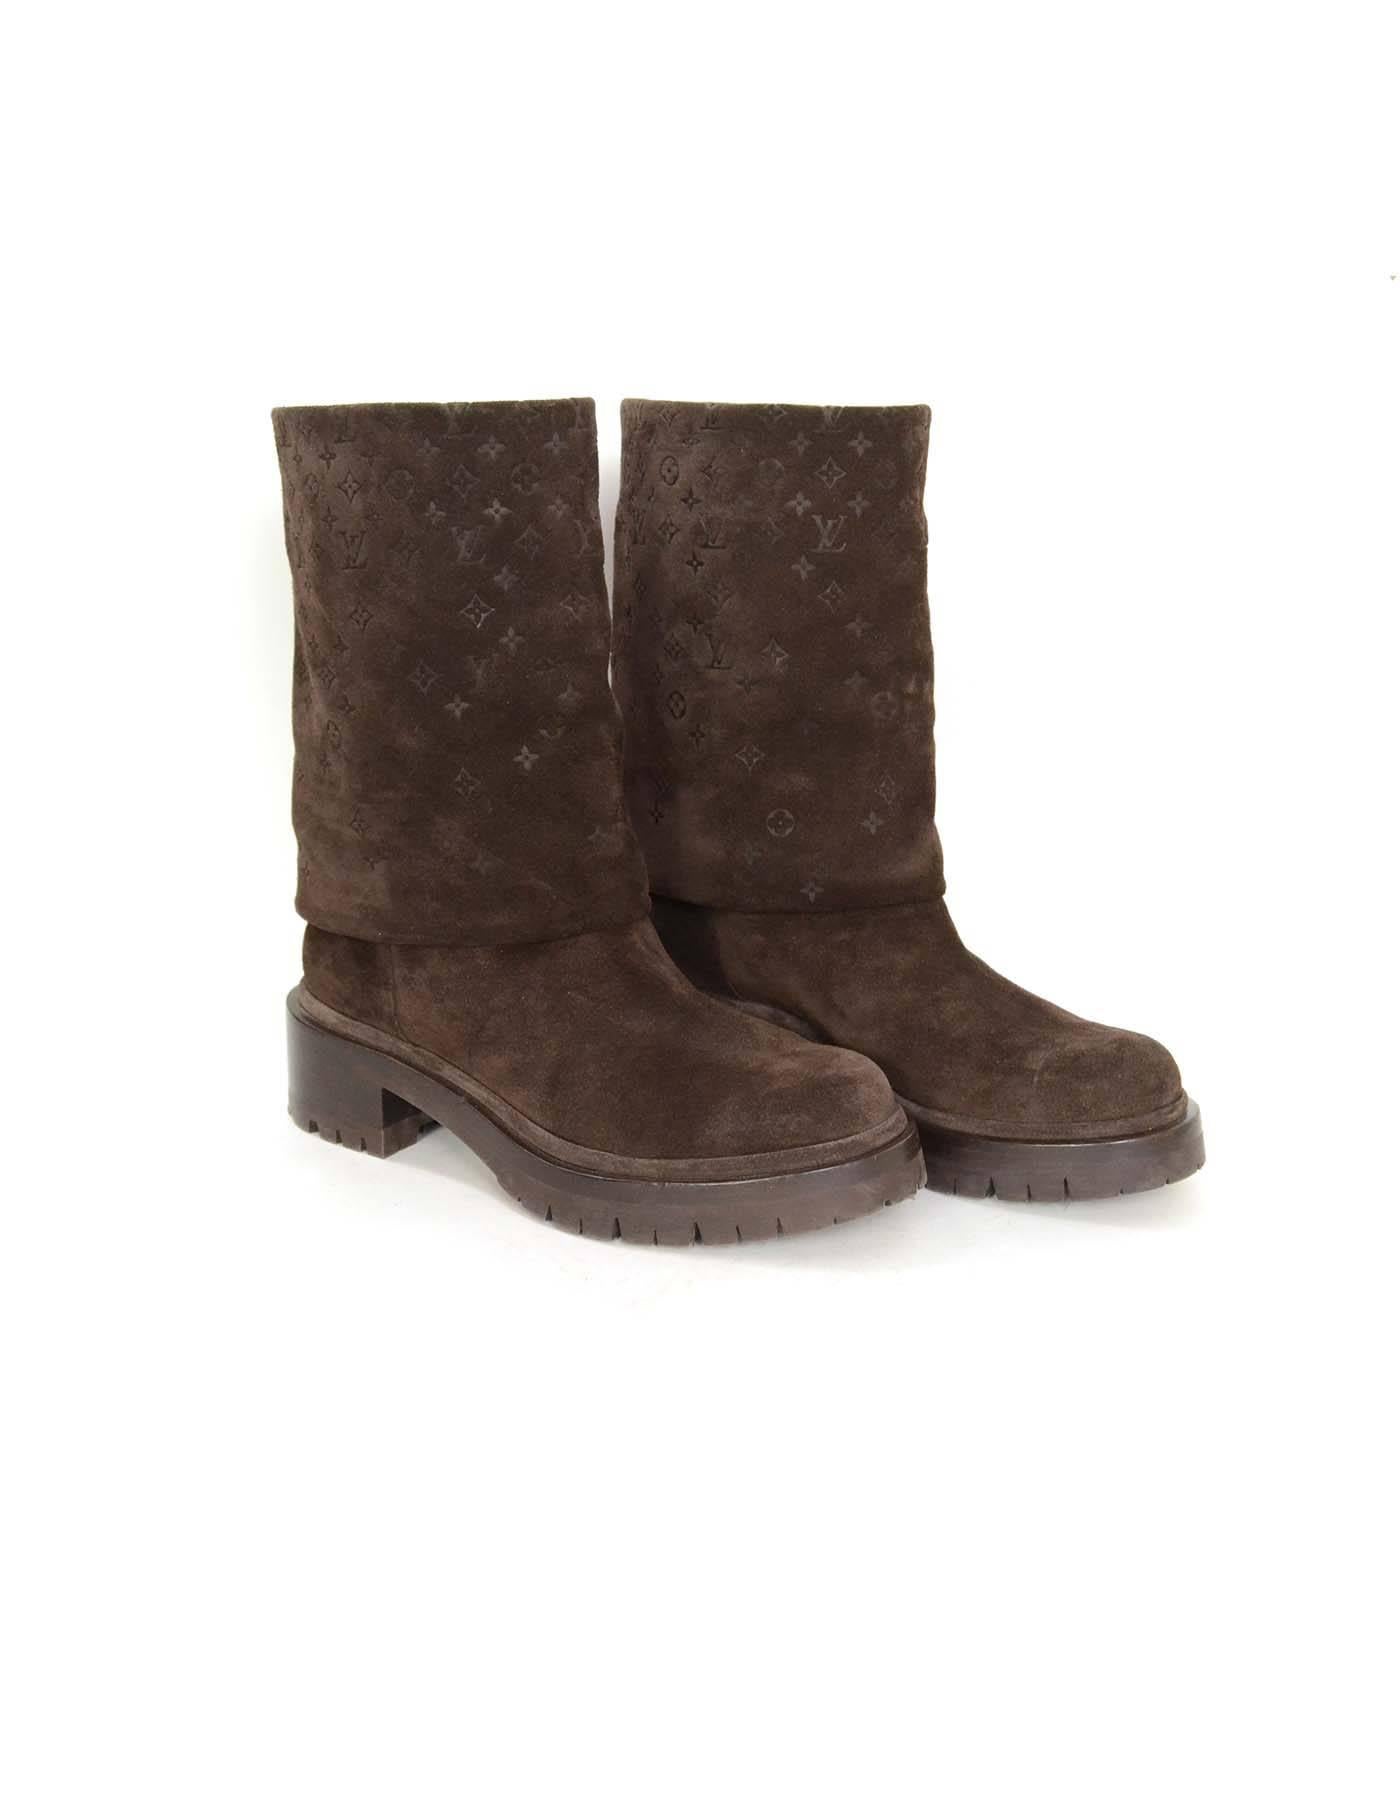 Louis Vuitton Brown Suede Foldover Monogram Cuff Boot sz. 37.5
Features folded-down top embossed with a LV monogram pattern
Made in: Italy
Color: Brown
Composition: Suede and rubber
Insole Stamp: TG0164 Made in Italy 37 1/2
Closure/opening: